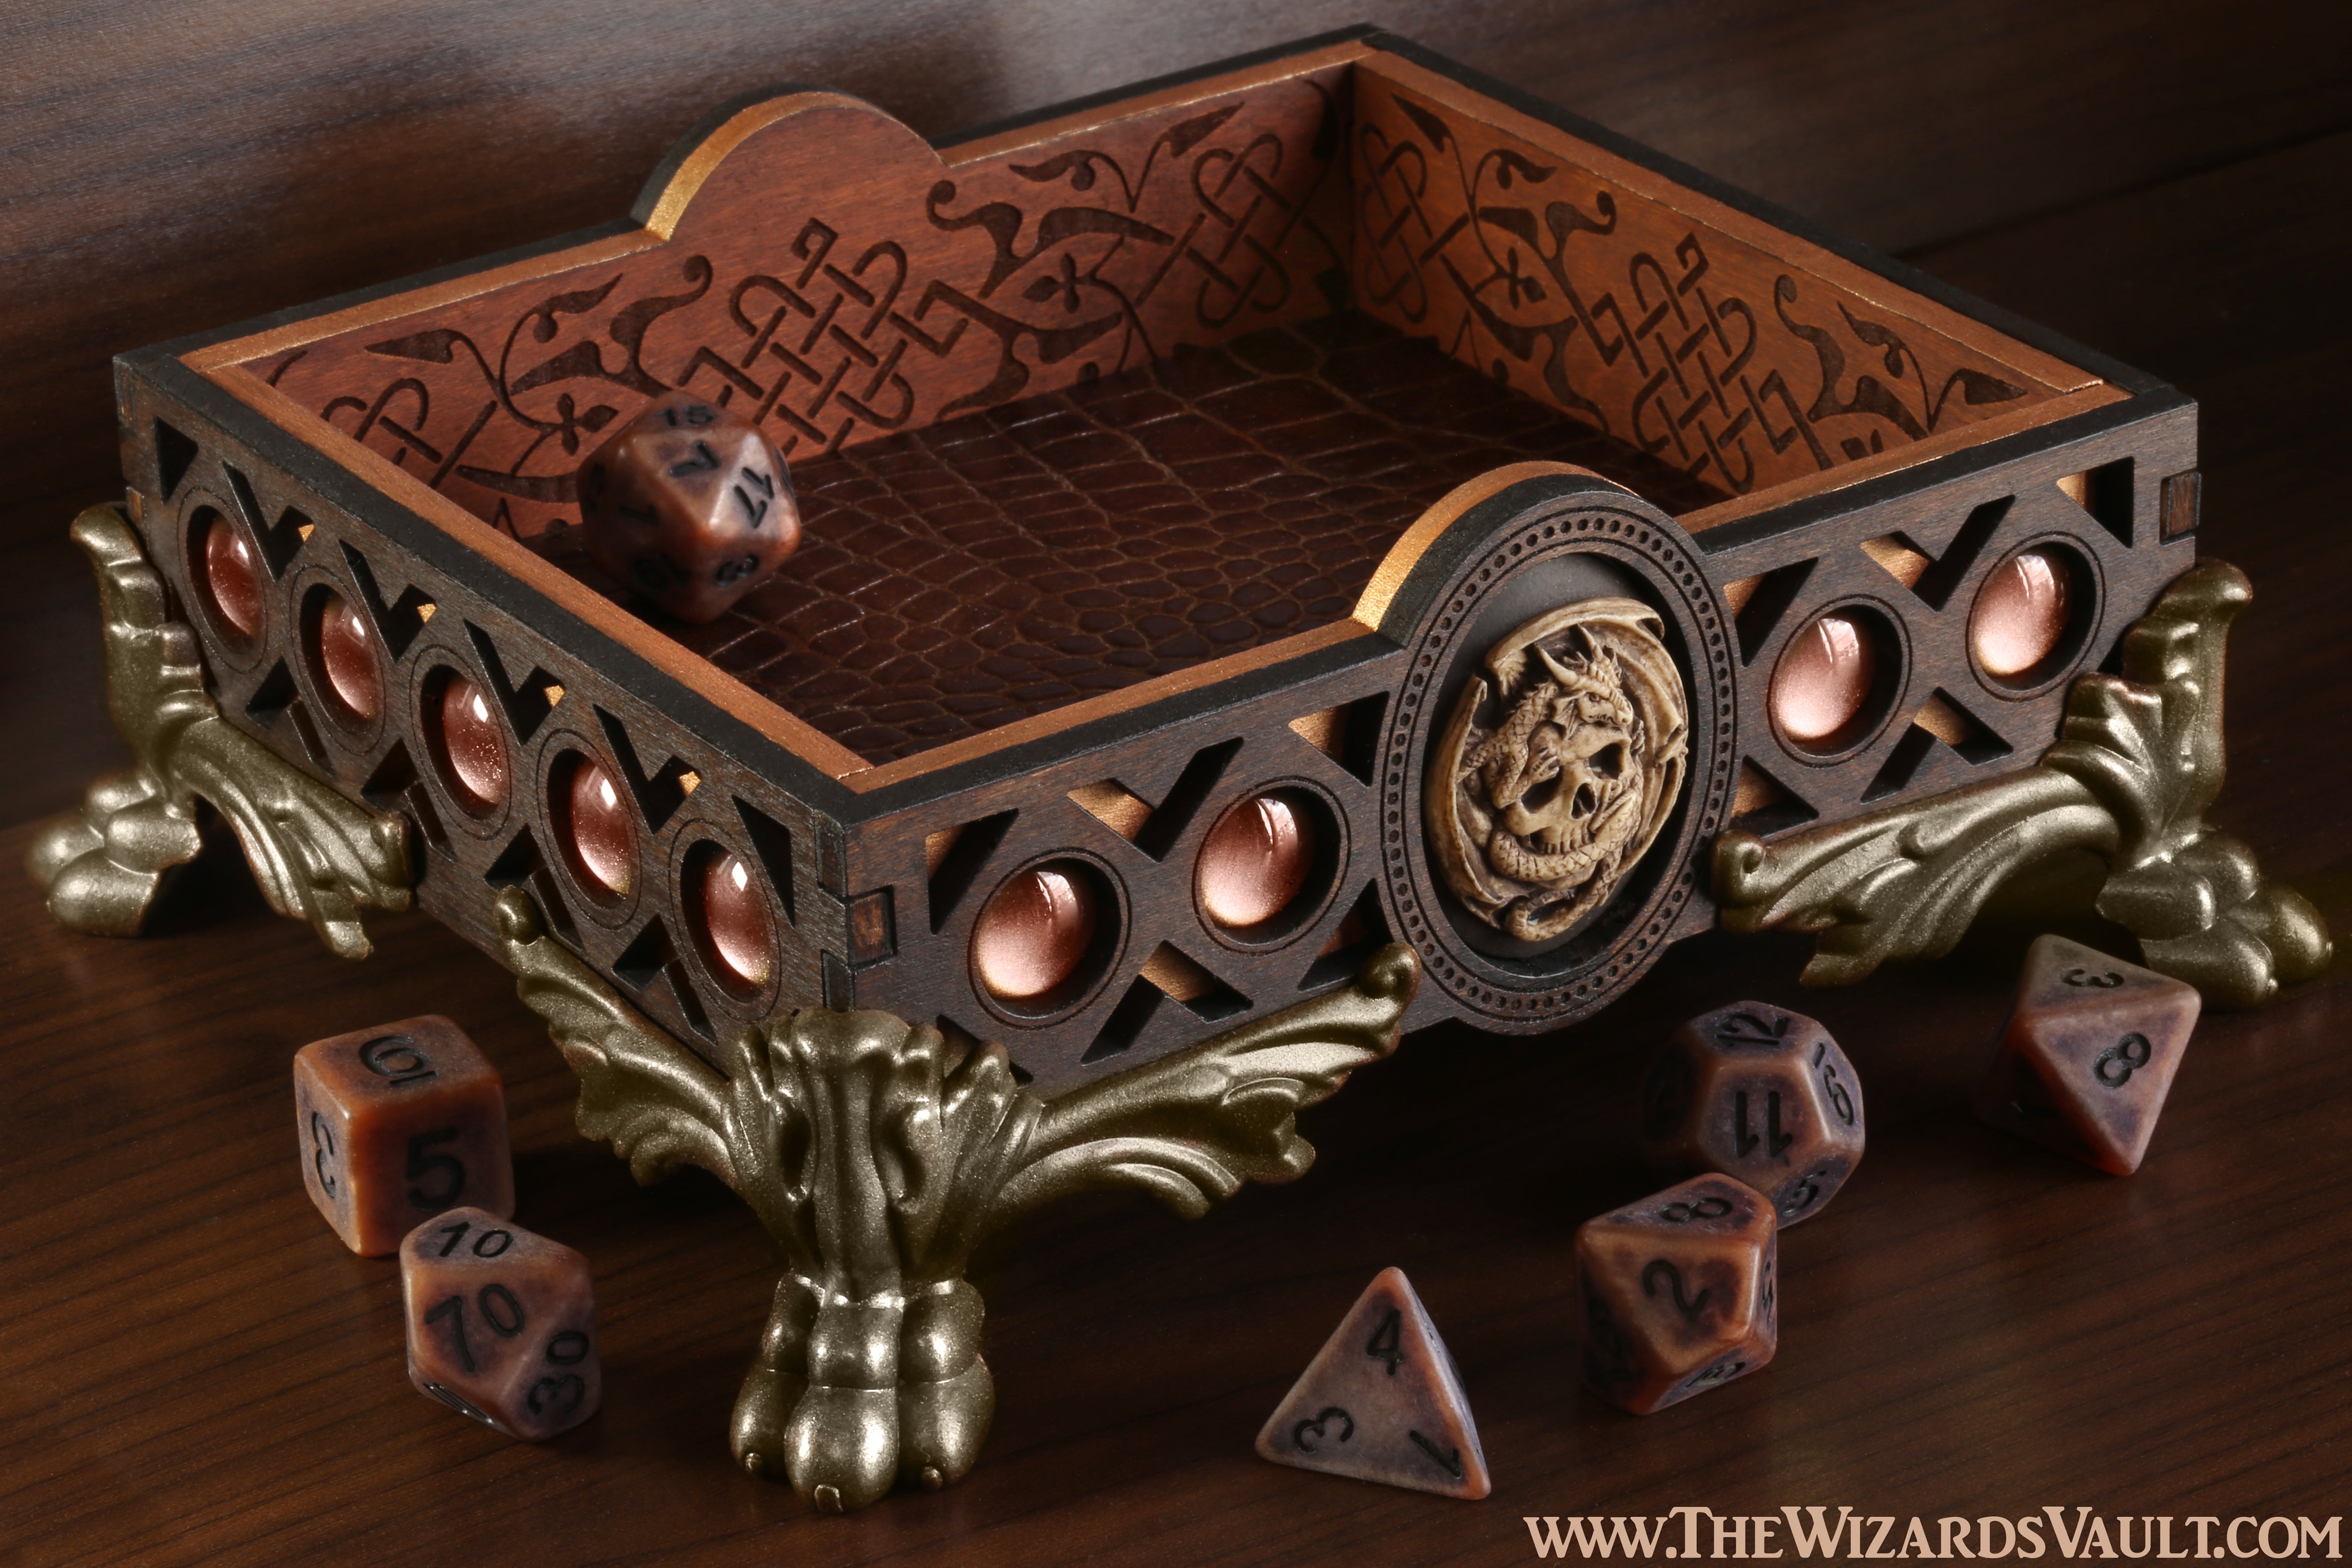 Copper dragon dice tray - The Wizard's Vault